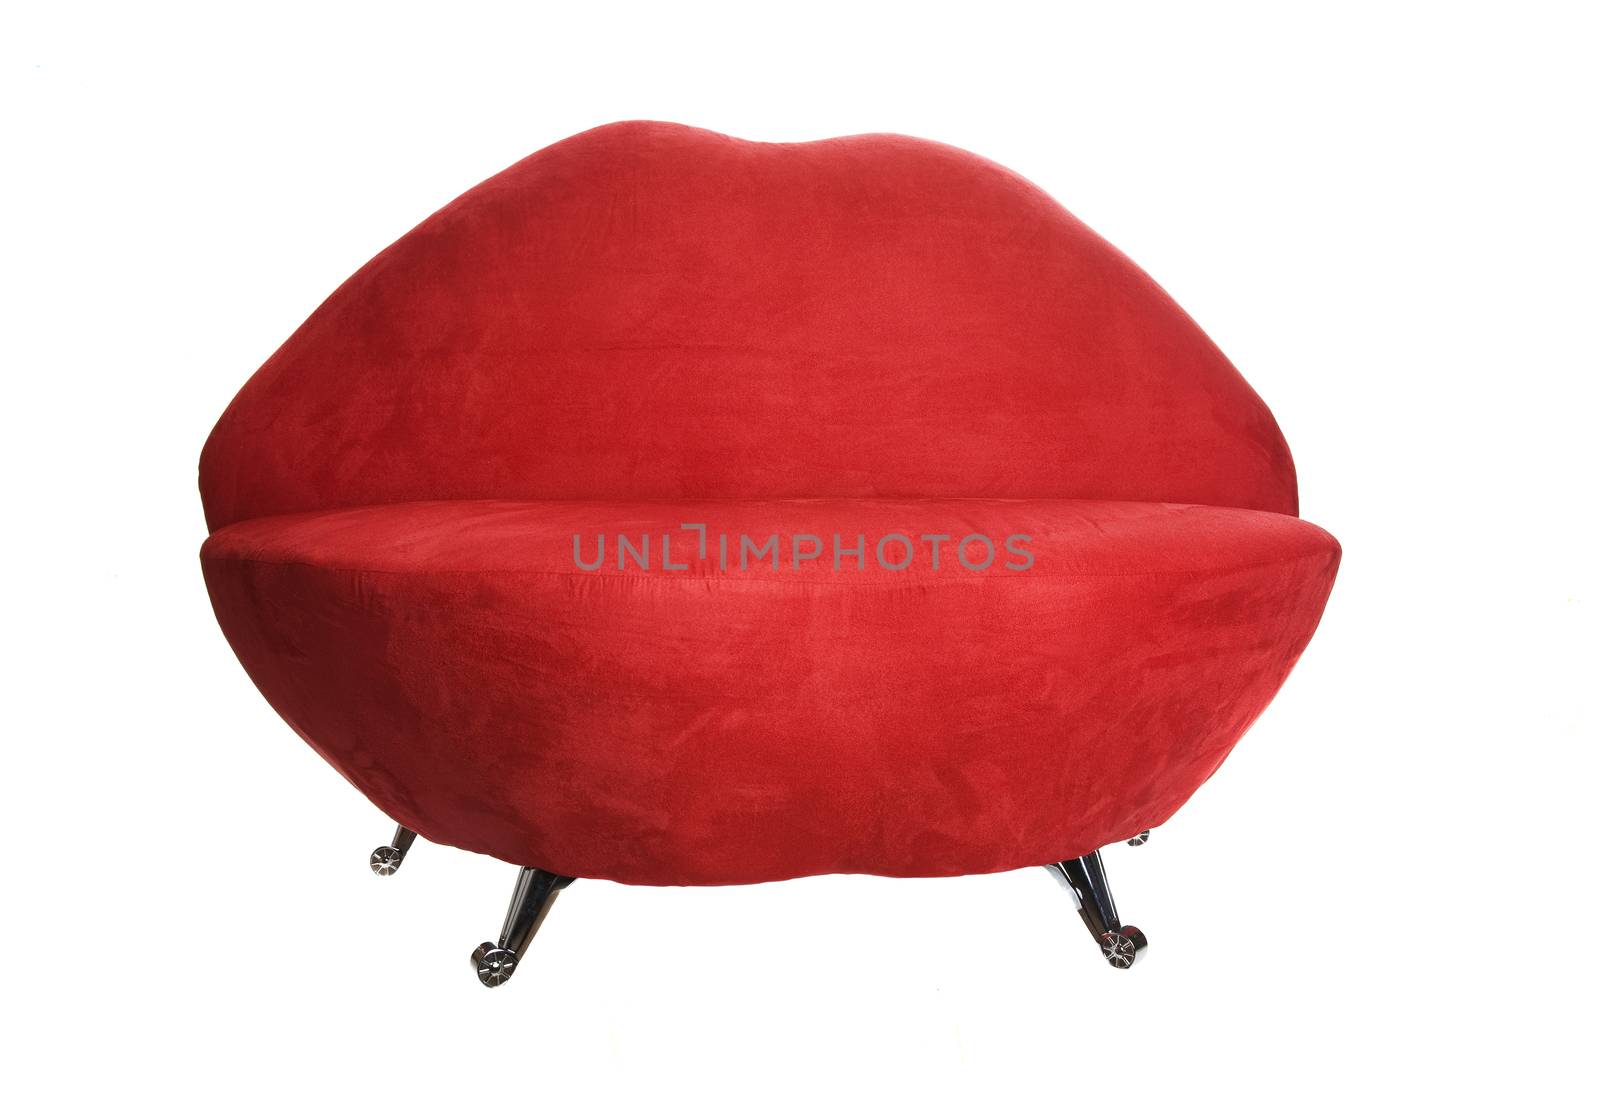 Crazy, red chair shaped like lips.  Great for Valentine's Day.  Shot on white background.